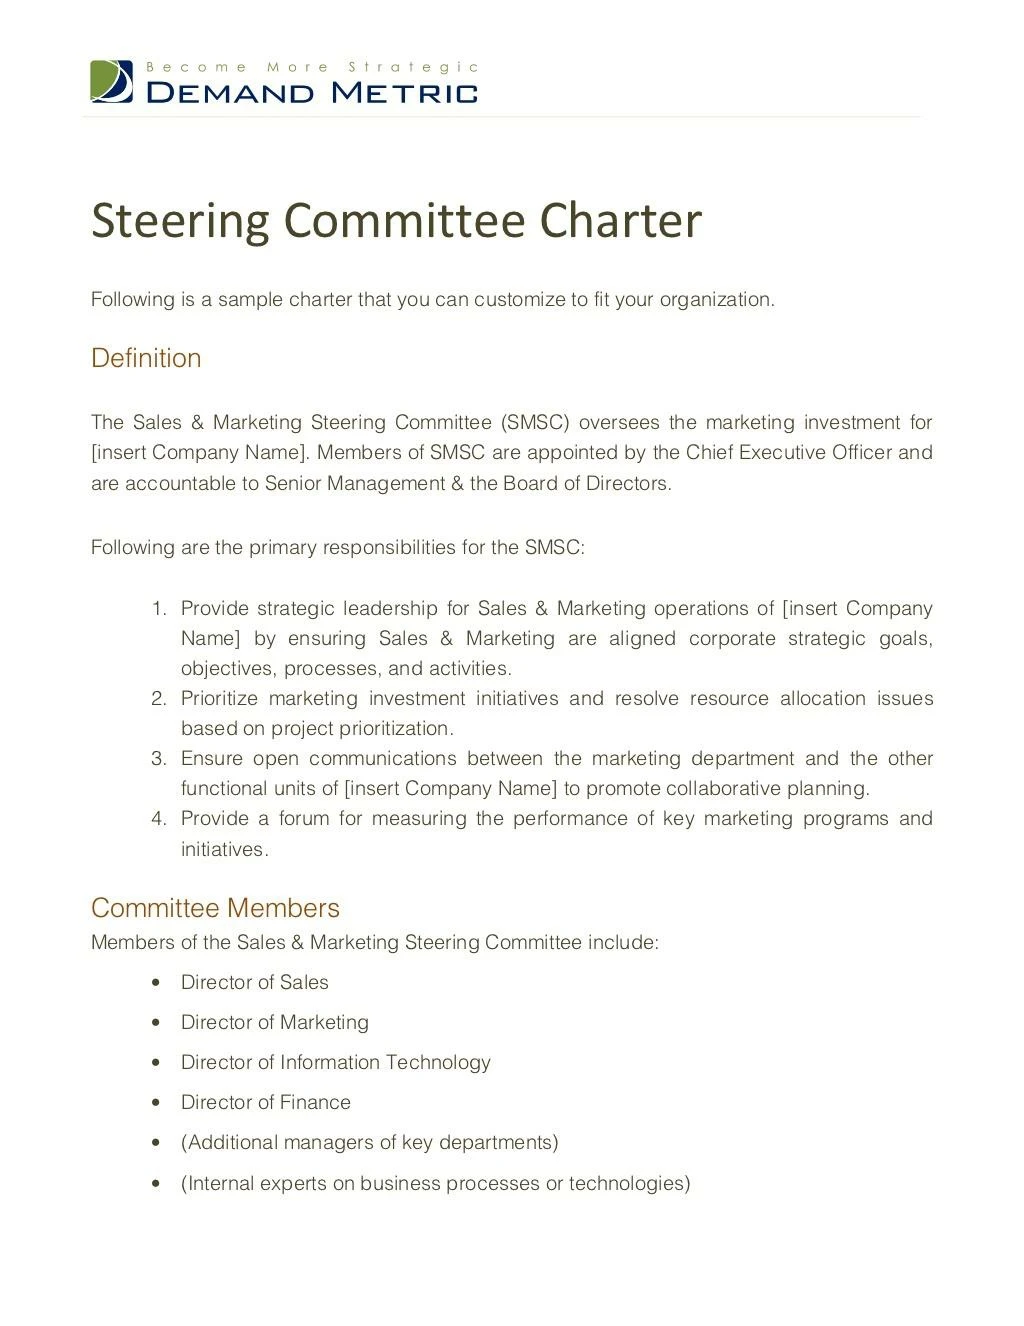 PPT Steering Committee Charter Template PowerPoint Presentation, free